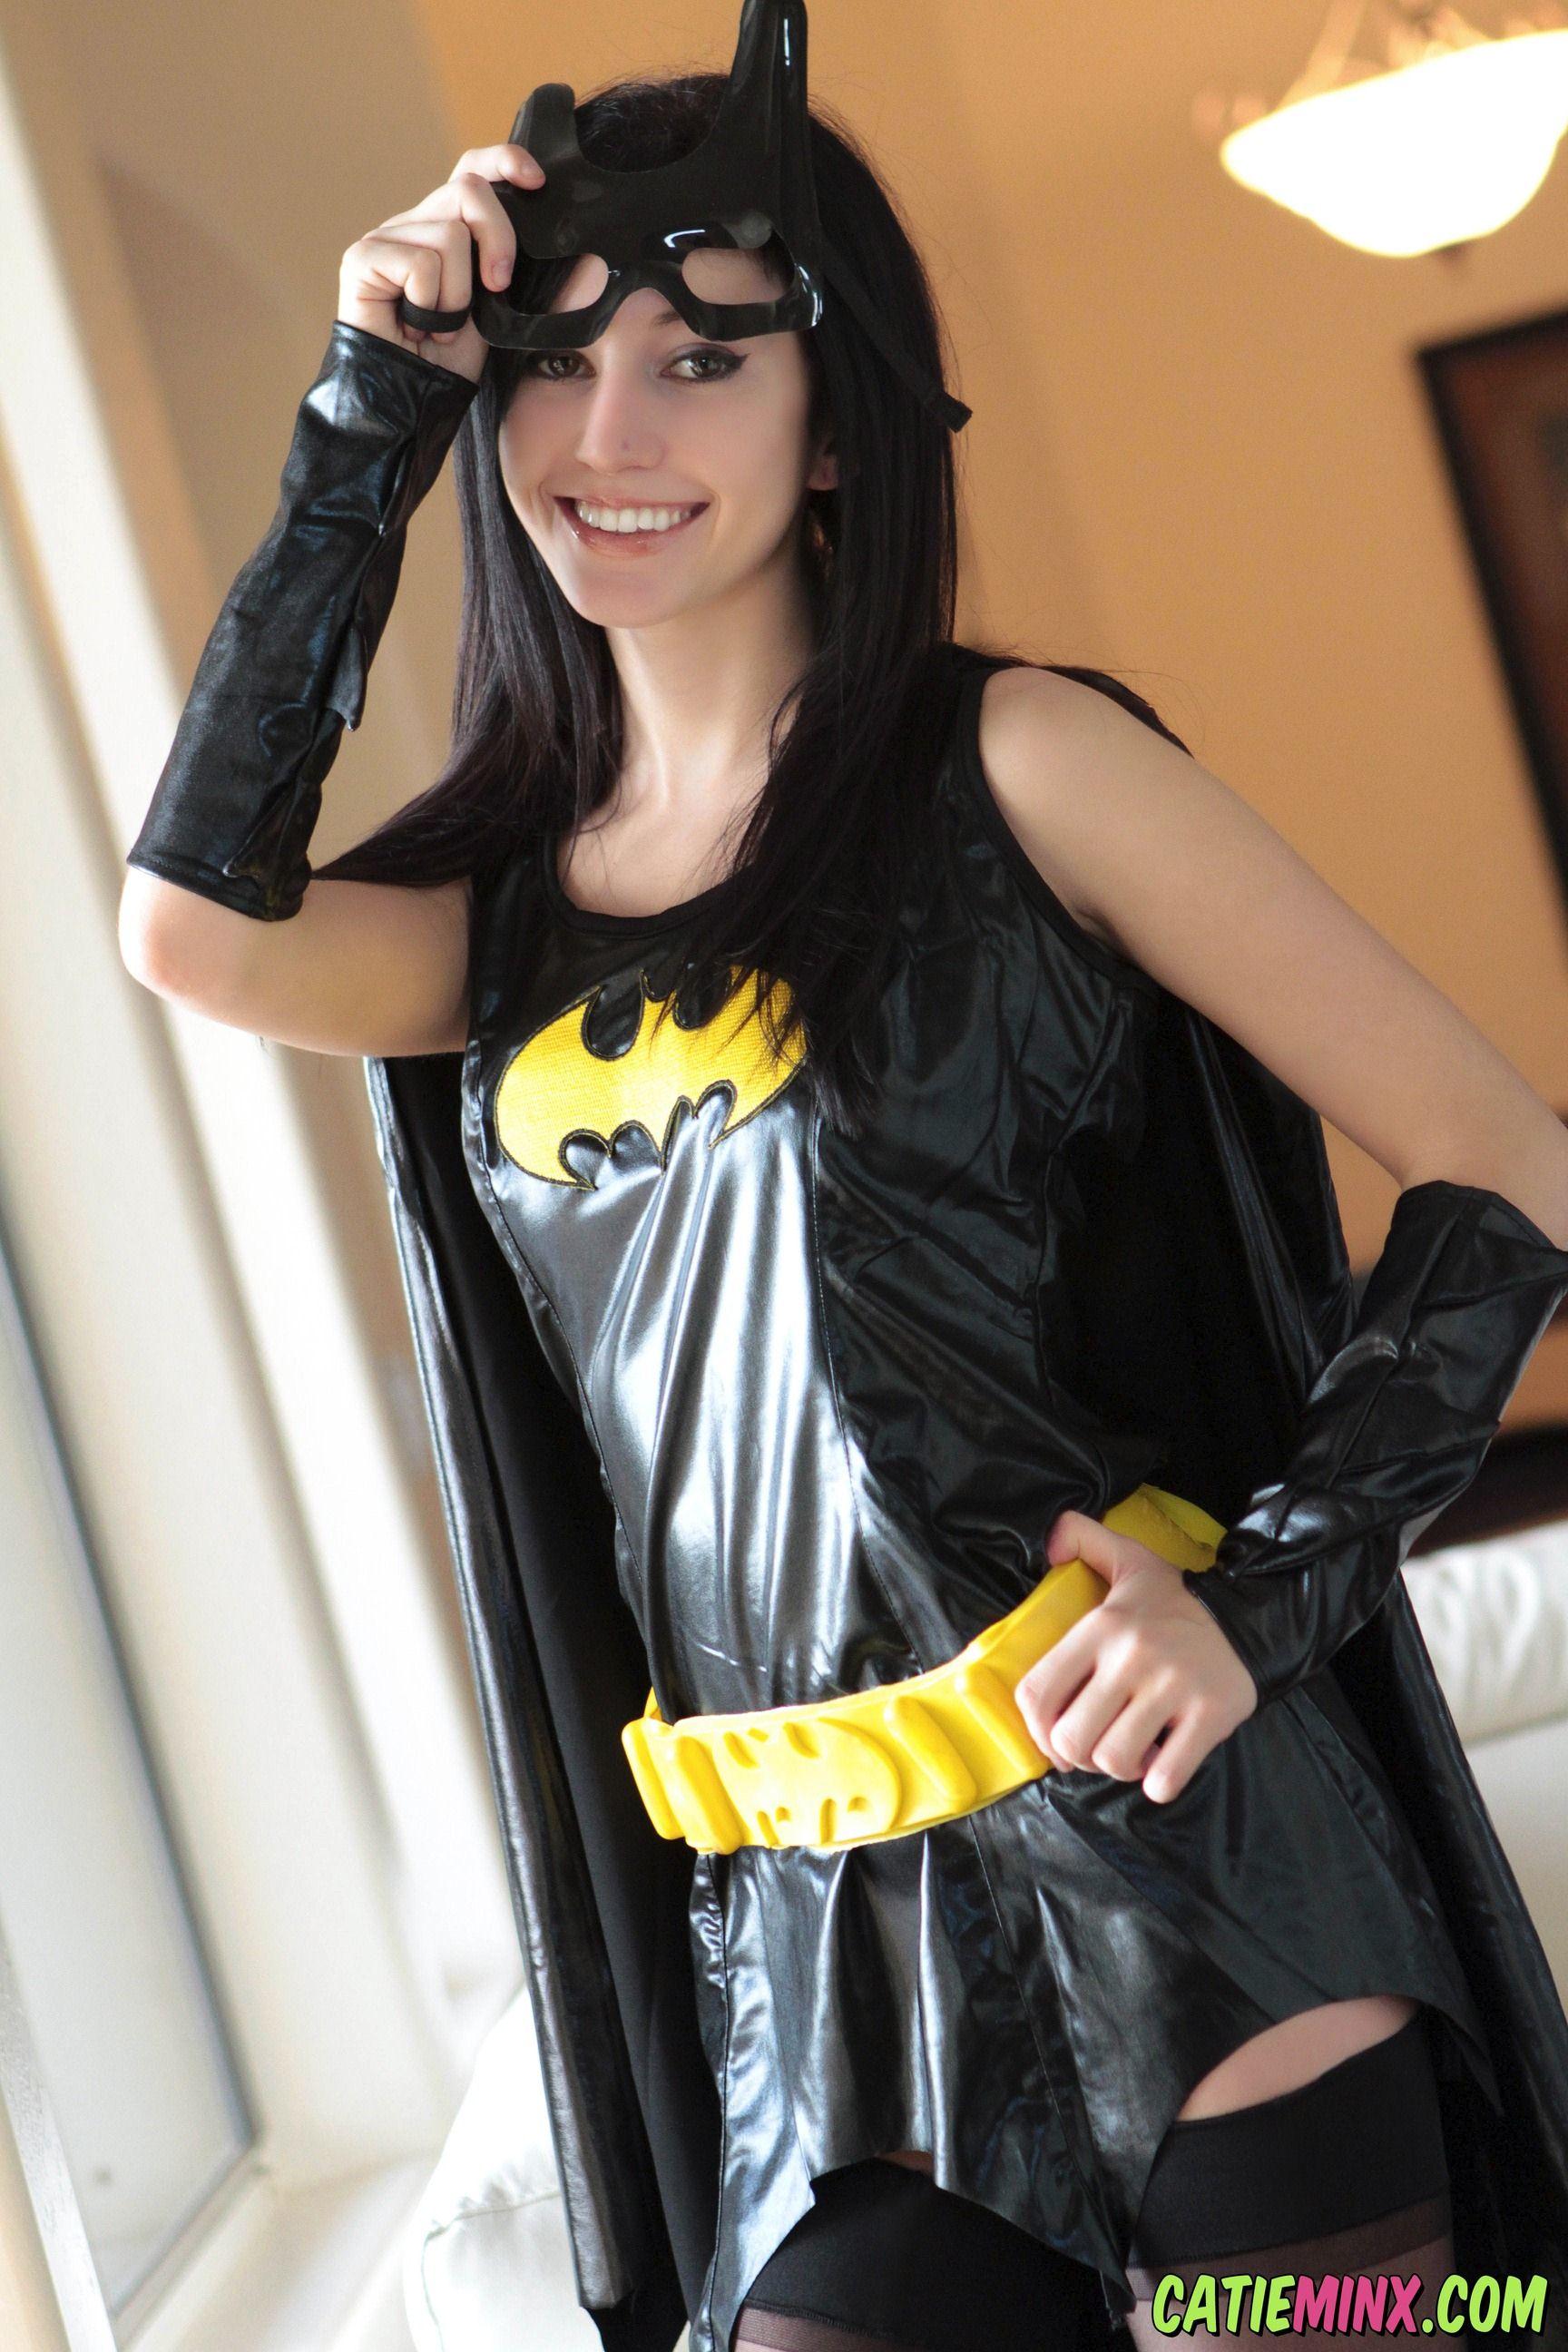 Pictures of Catie Minx celebrating the release of The Dark Knight Rises in style #53727067